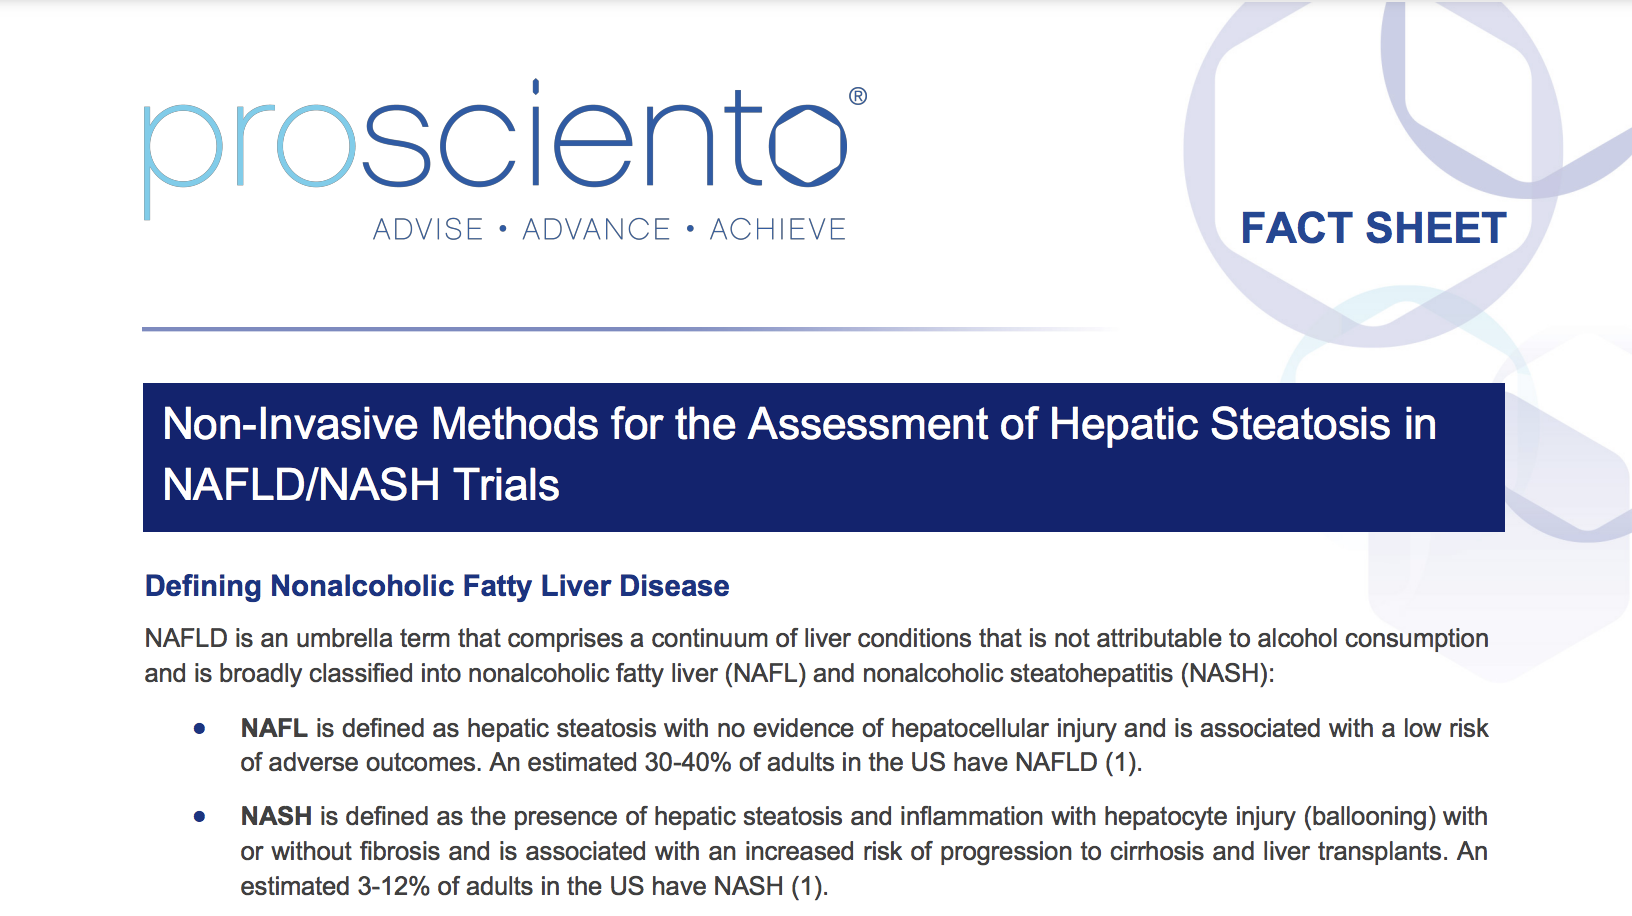 image of Non-Invasive Methods for the Assessment of Hepatic Steatosis in NAFLD/NASH Trials